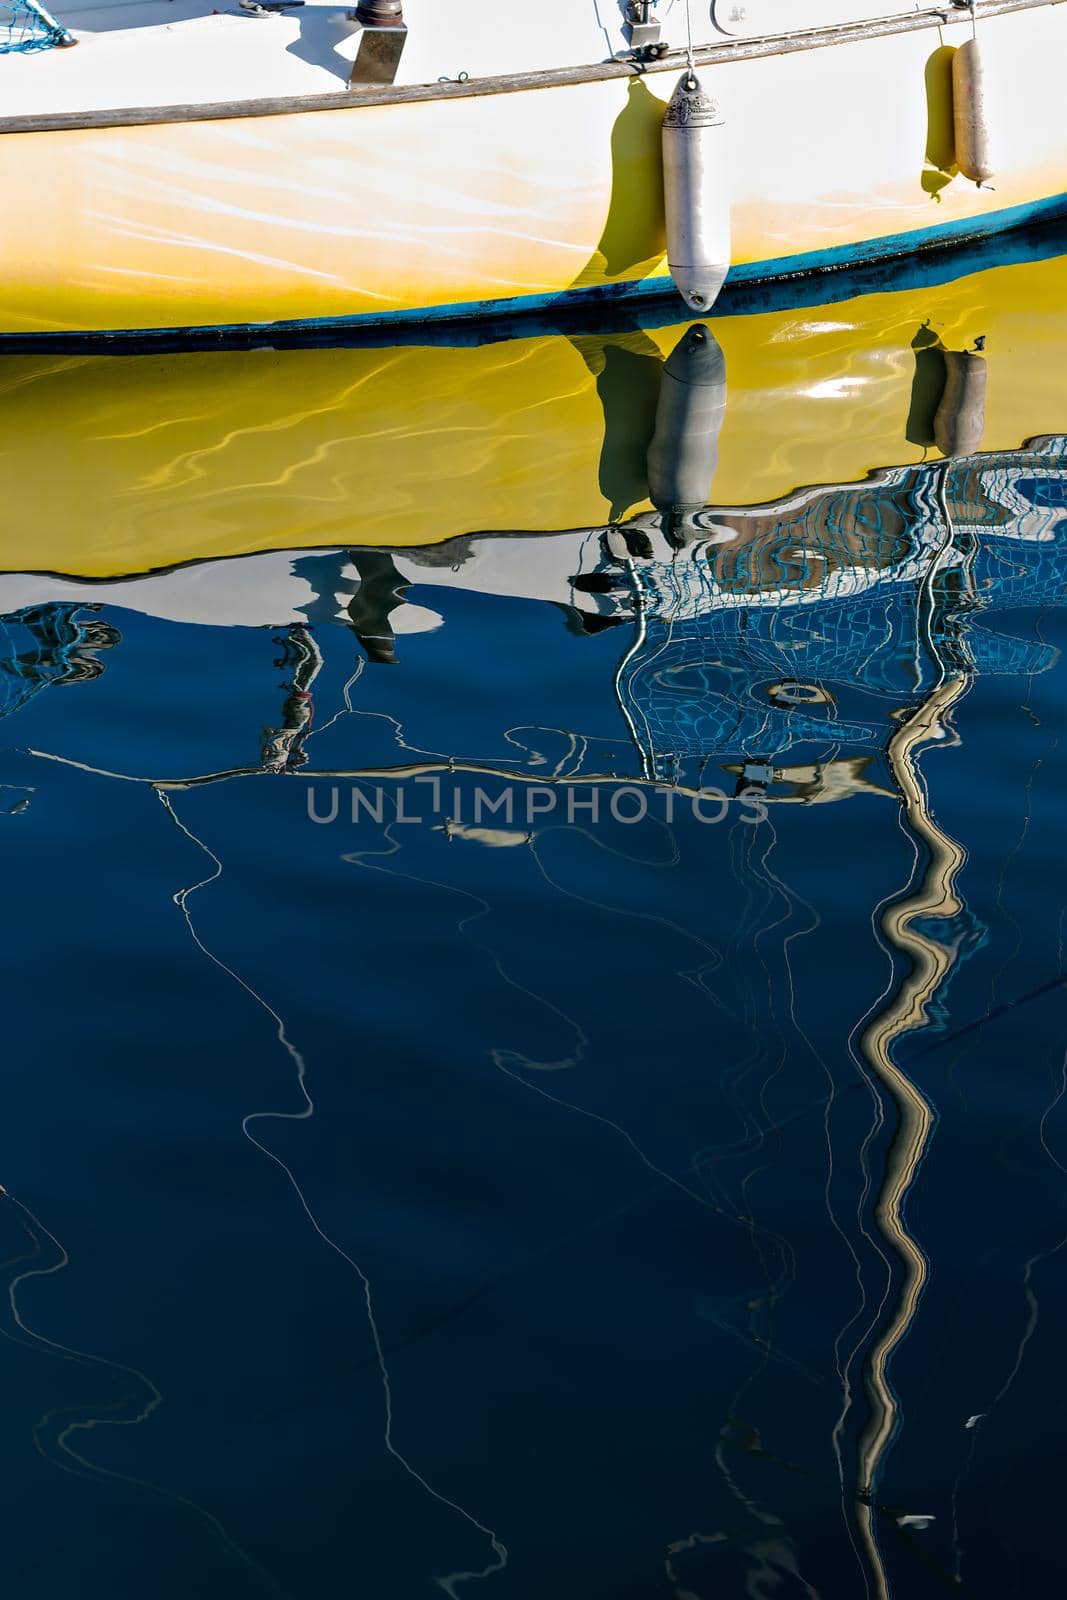 Pleasure boat with reflections in the water in the marina.